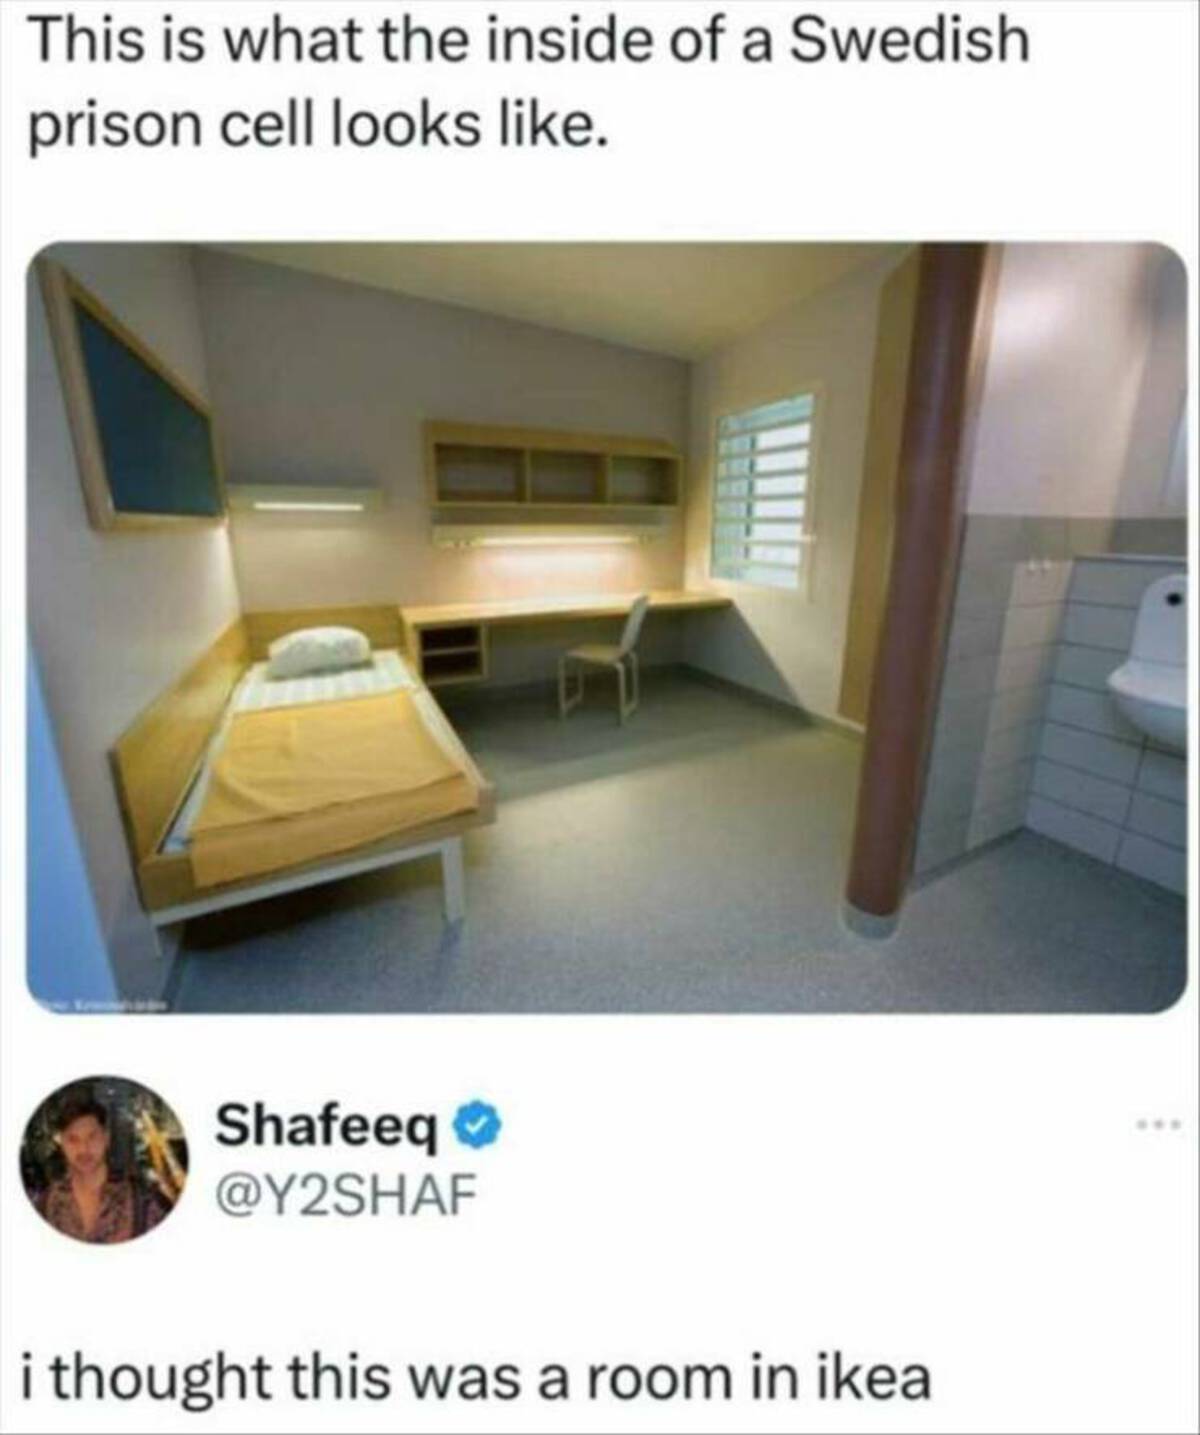 london apartment or swedish prison - This is what the inside of a Swedish prison cell looks . Shafeeq i thought this was a room in ikea